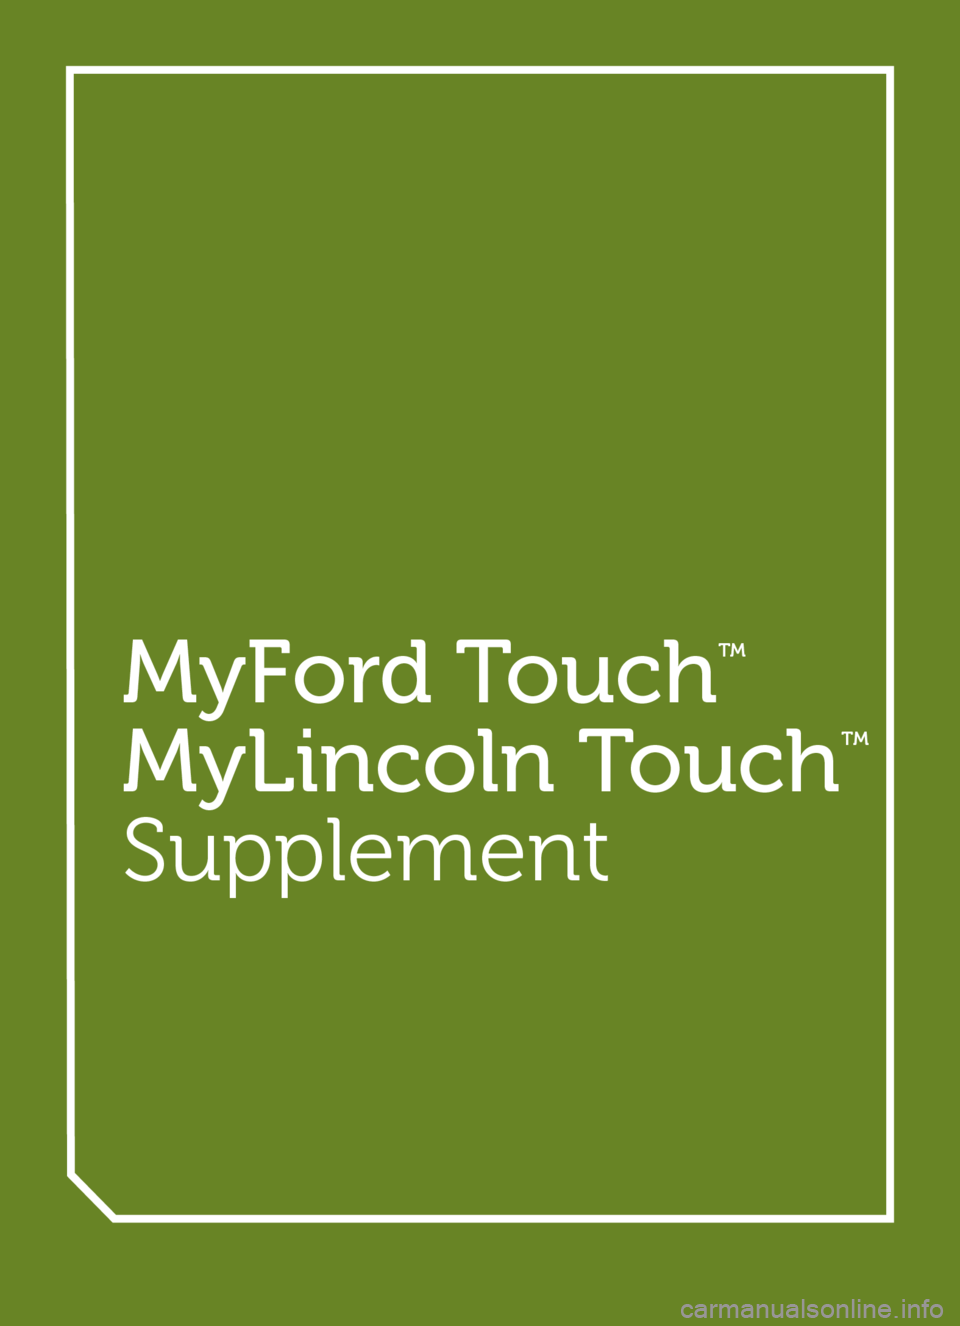 FORD EXPLORER 2011 5.G MyFord Touch Supplement Manual 